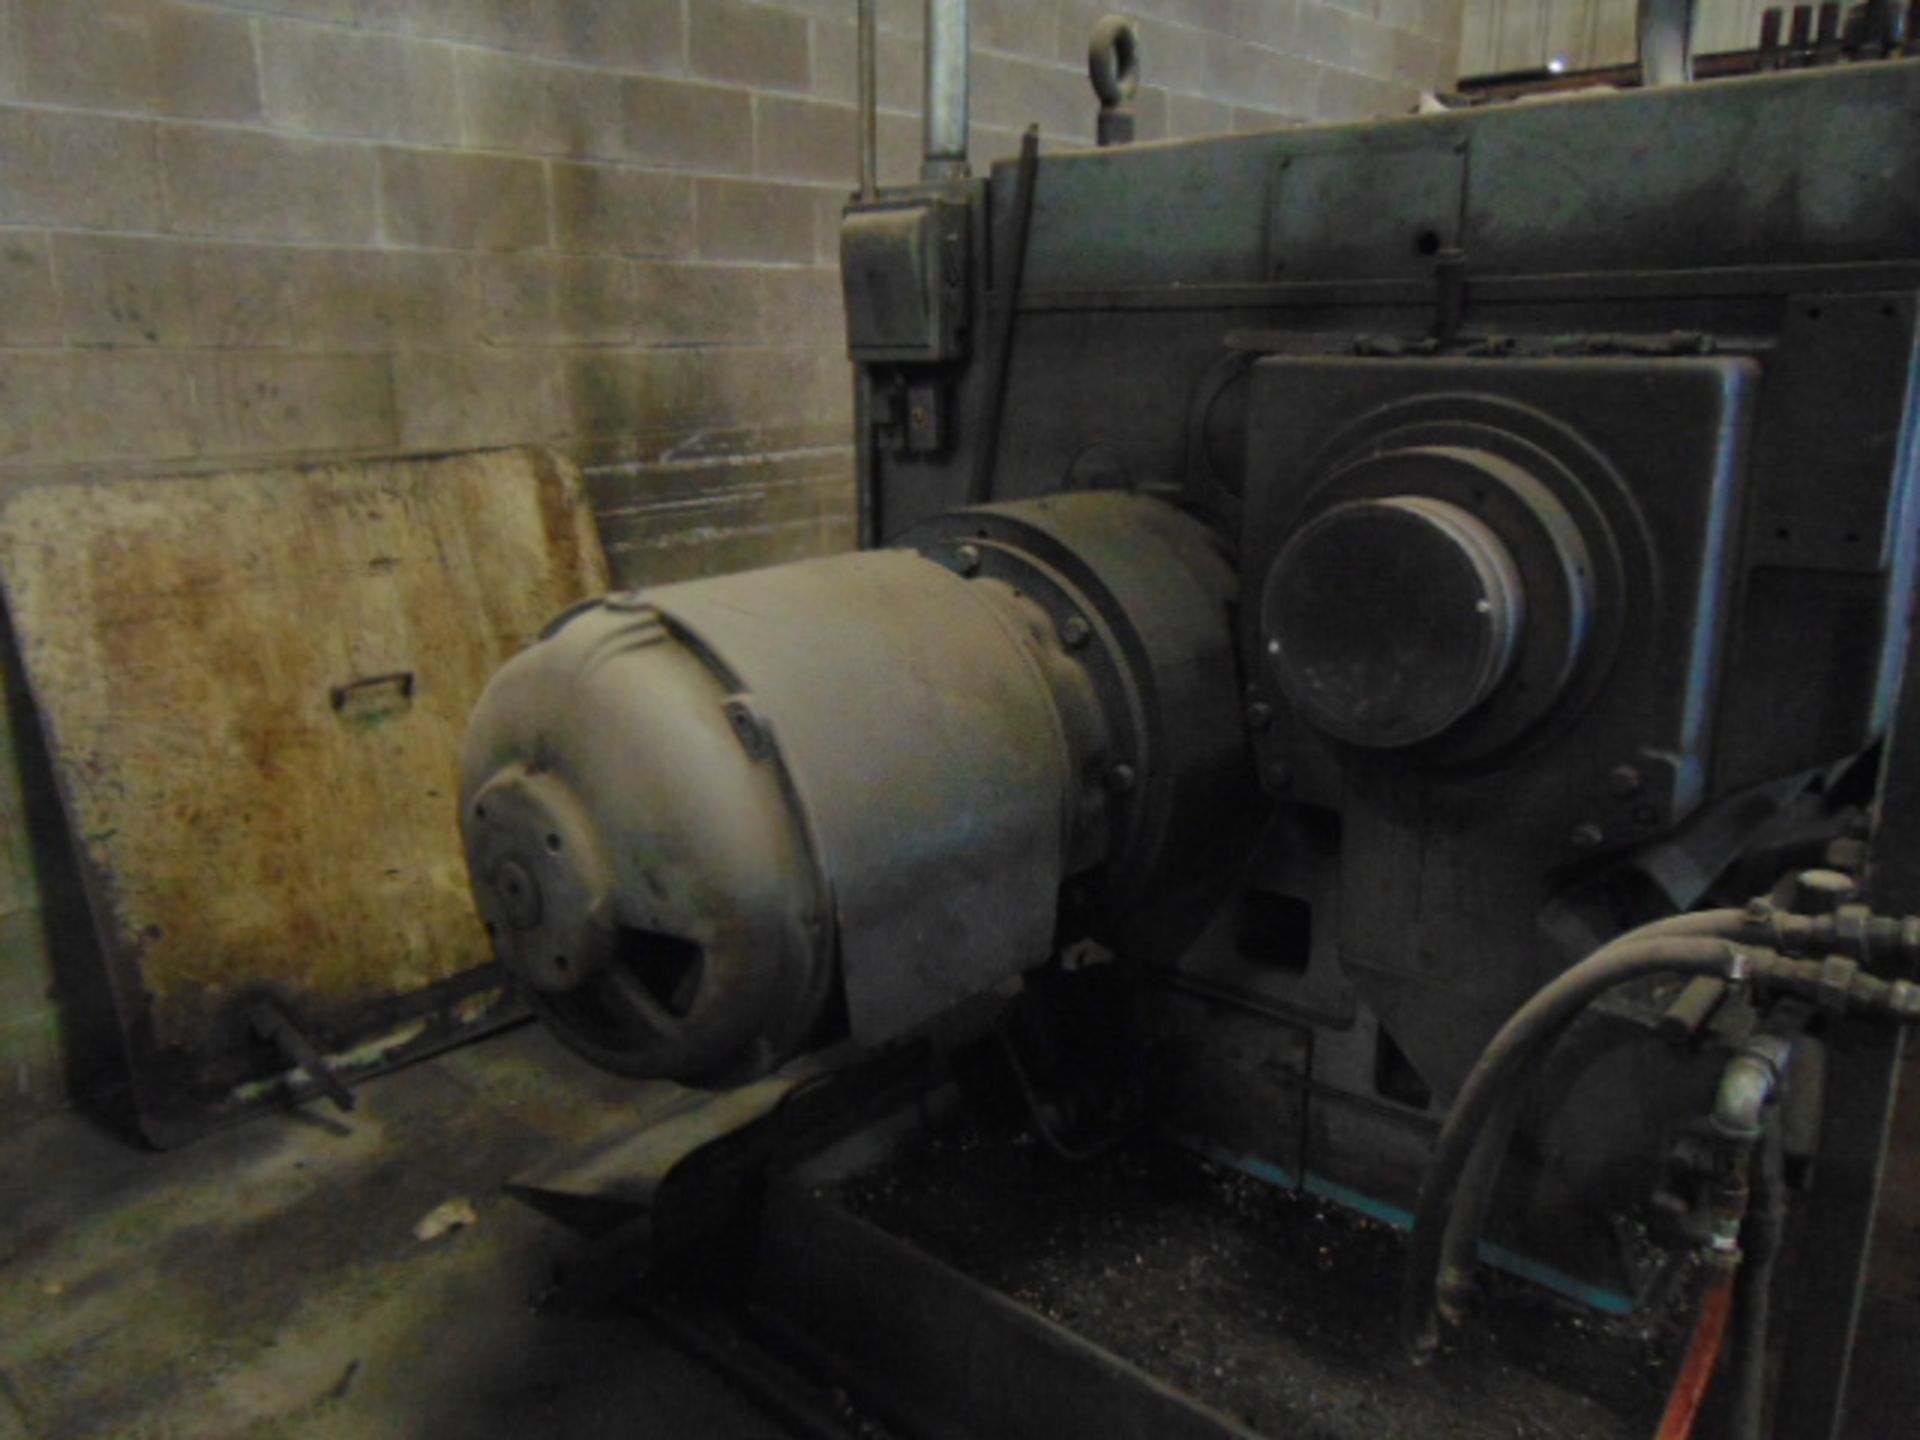 TURRET LATHE, WARNER & SWASEY MDL. 4A M-3350, S/N 1546007(Located at: Machine Station, 601 McFarland - Image 12 of 18